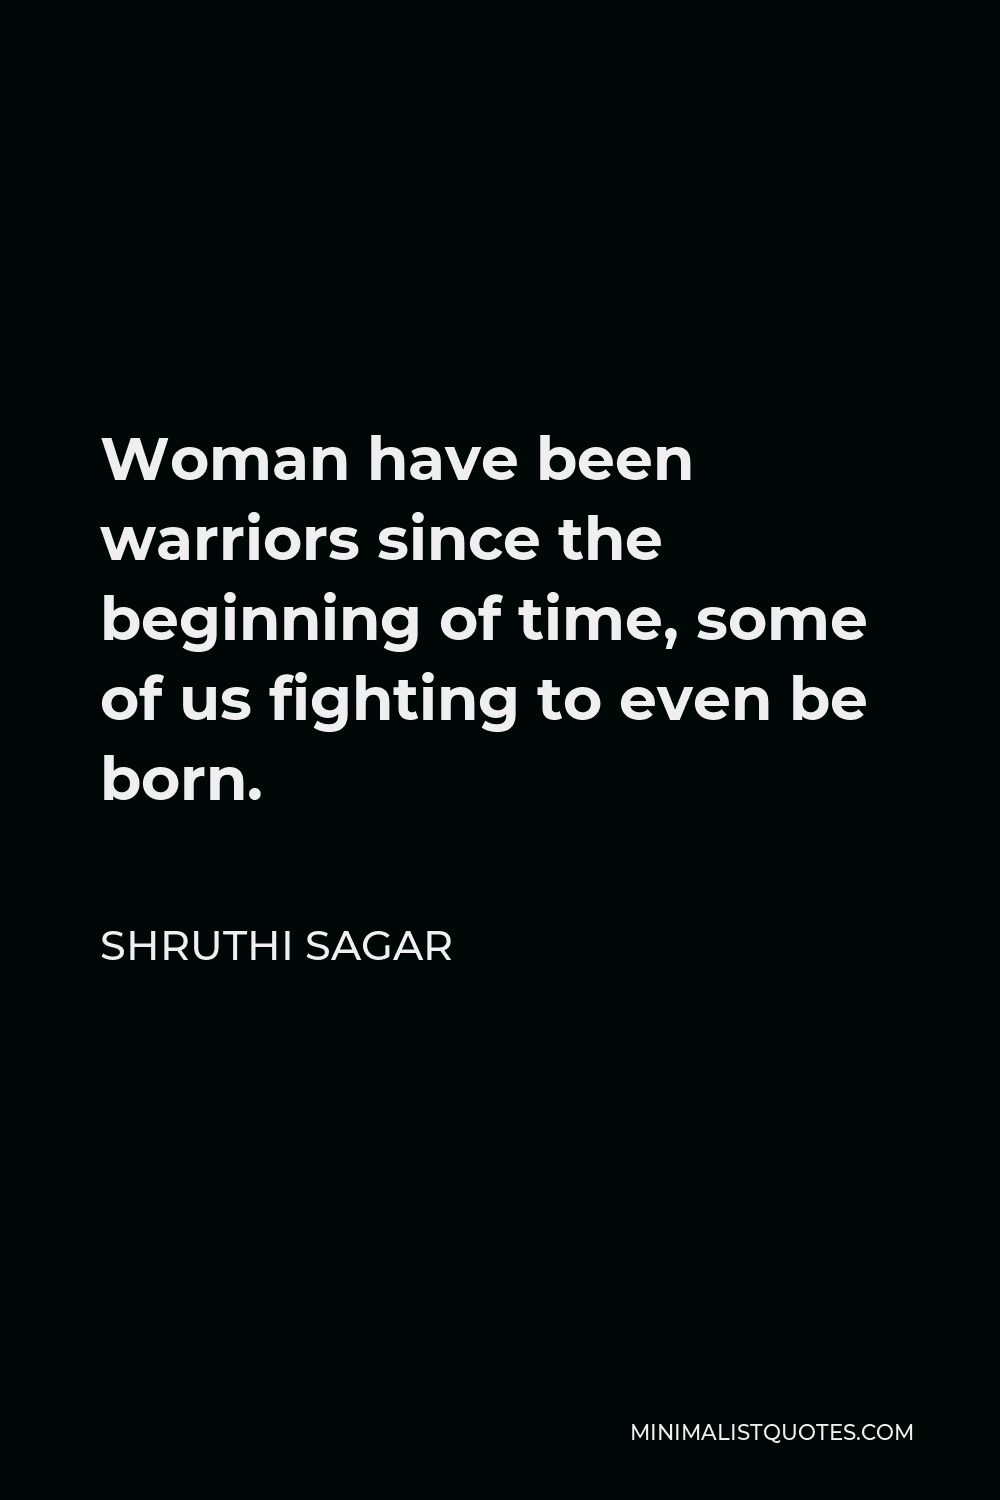 Shruthi Sagar Quote - Woman have been warriors since the beginning of time, some of us fighting to even be born.